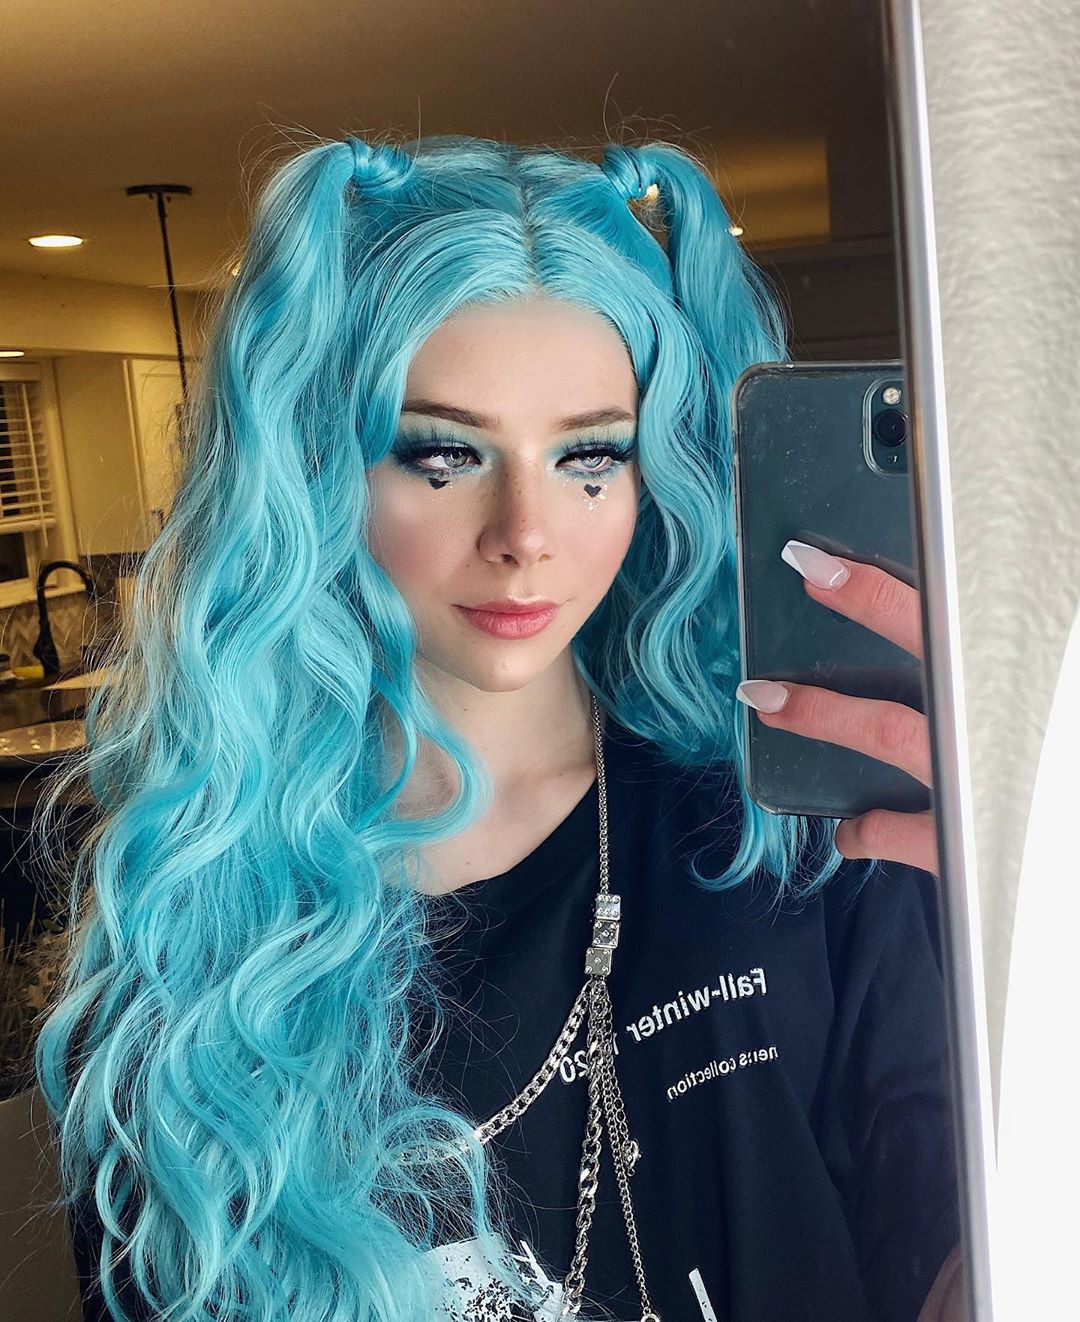 Jake Warden Cute Girls Face Instagram, Woman Long Hair Style, Hairstyle For Girls: Hair Color Ideas,  Turquoise And Aqua Outfit,  Jake Warden TikTok  